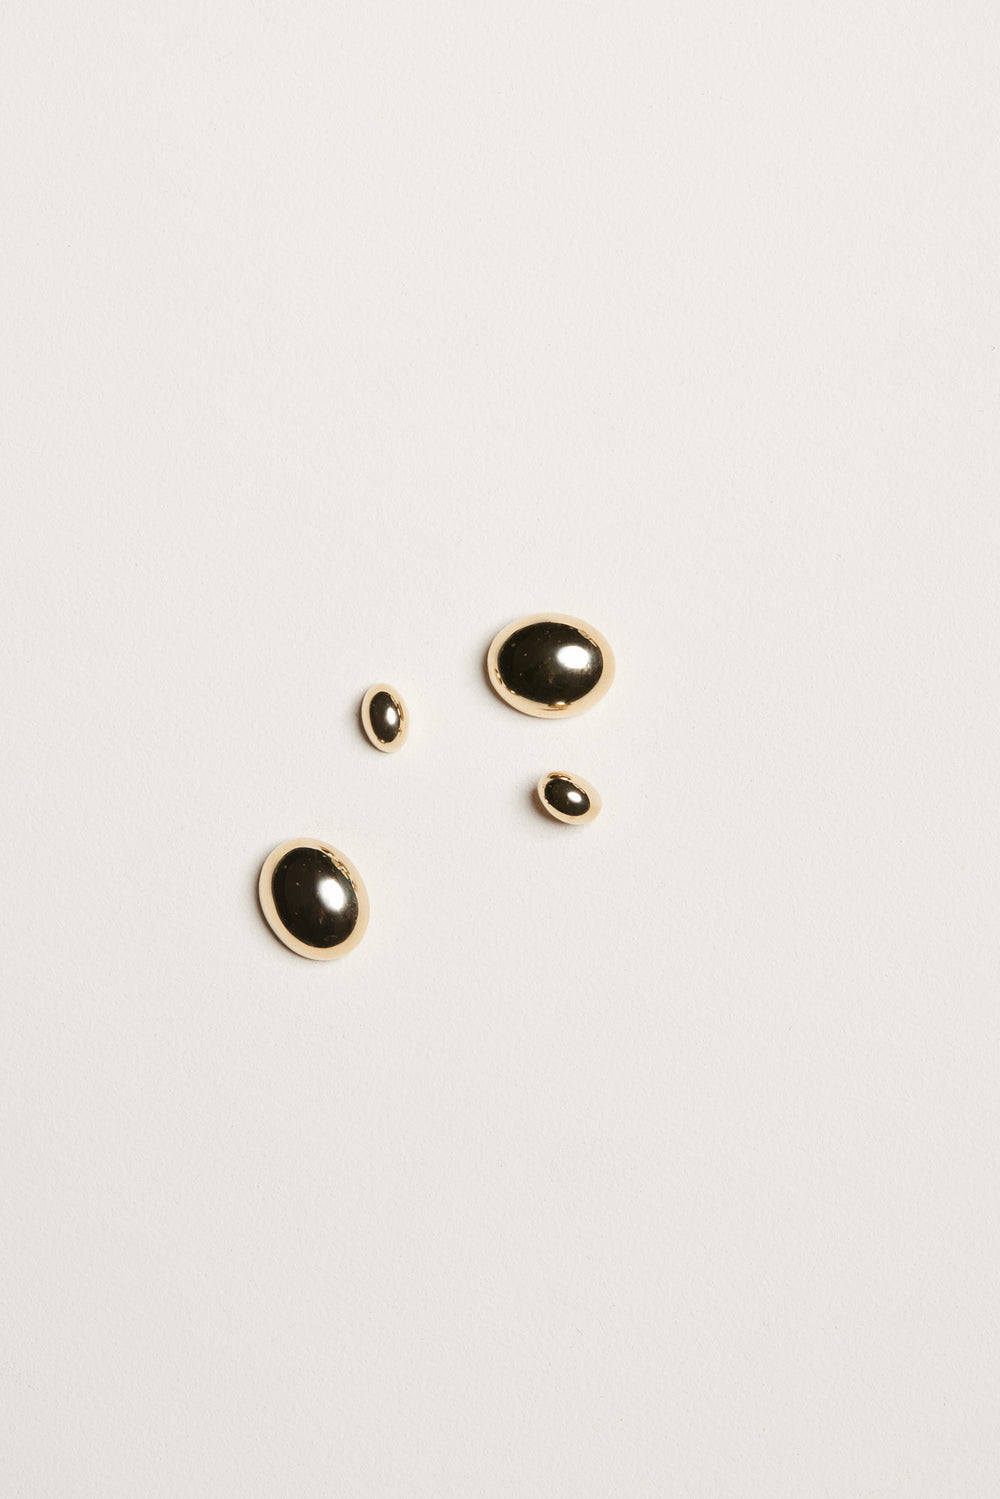 Vivienne Small Oval Studs | Silver or 9K White Gold, More Options Available| Natasha Schweitzer